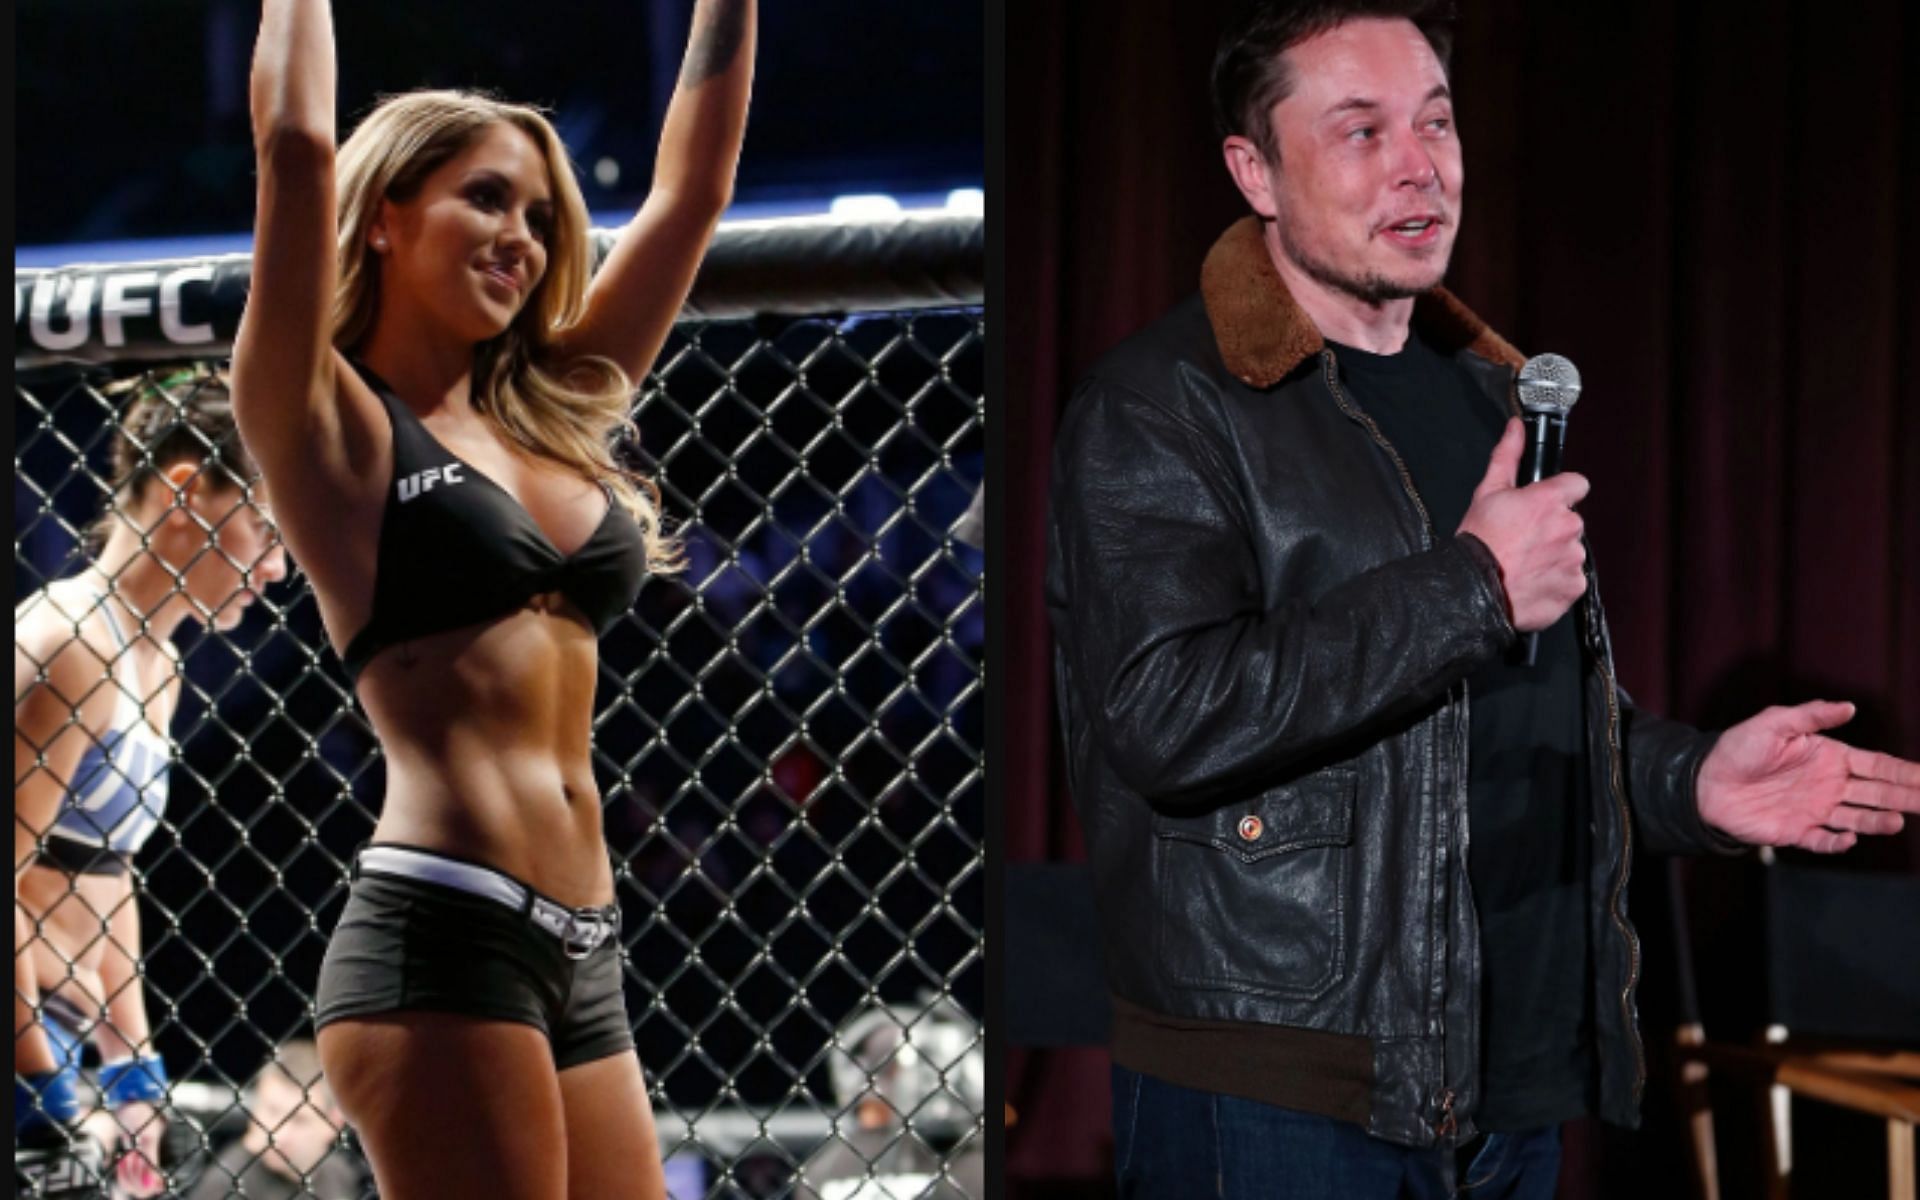 UFC ring girl Brittney Palmer on the right and billionaire Elon Musk on the right.